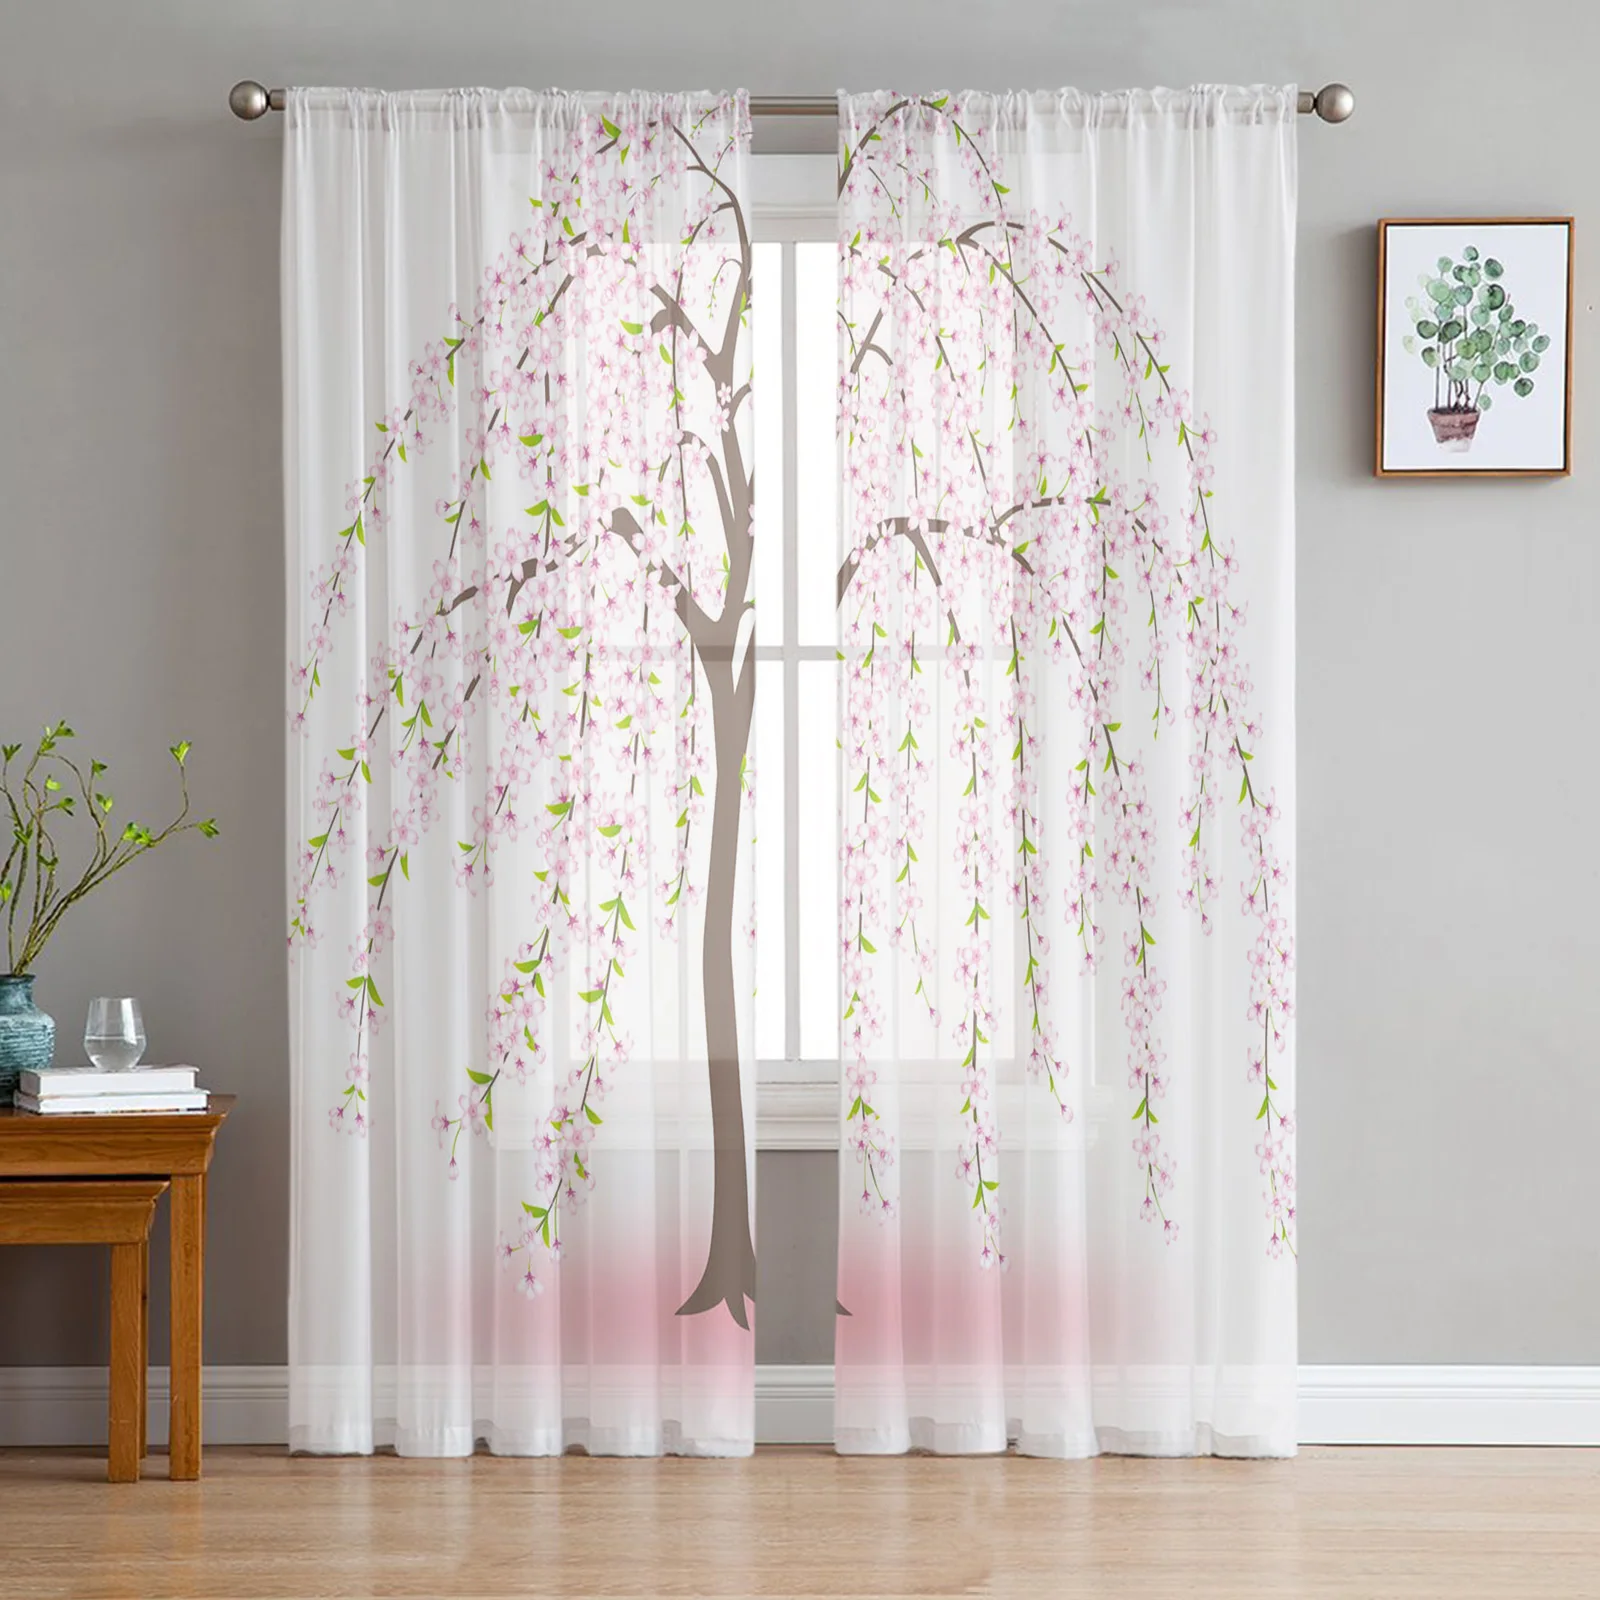 

Plum Tree Branch Brown Pink Tulle Curtains For Living Room Bedroom Decoration Sheer Voile Window Curtains Party Drapes Panels